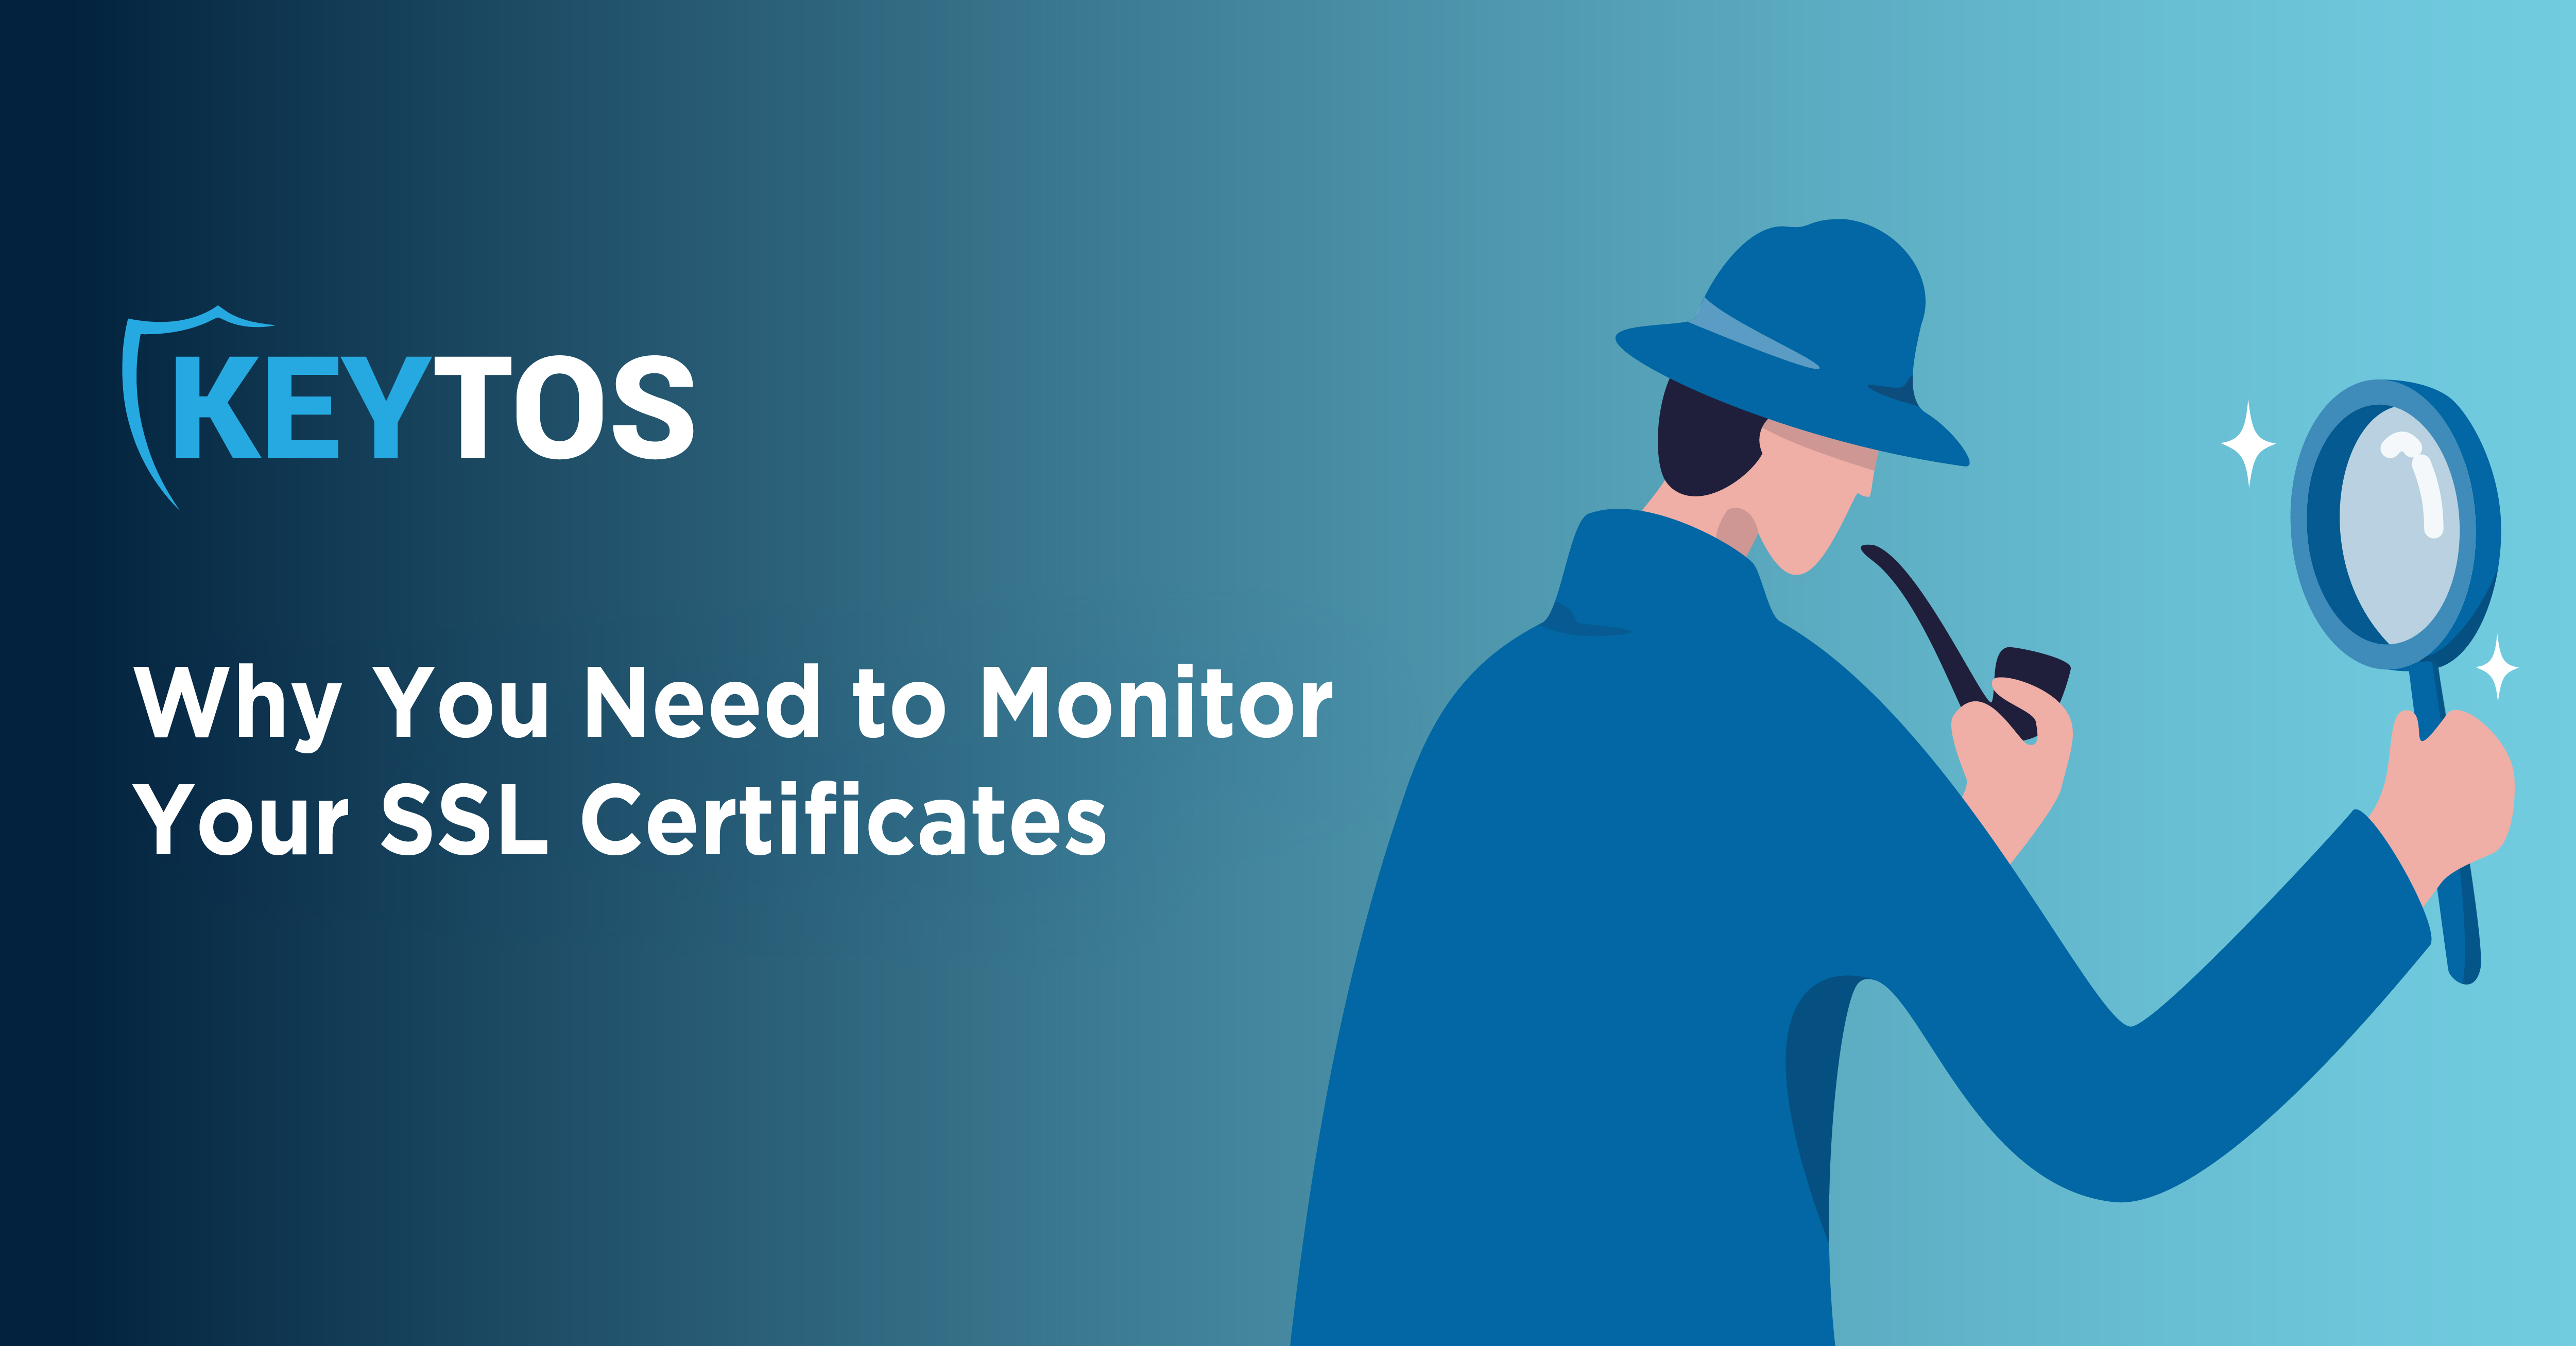 What is SSL Certificate Monitoring and Why is it Important?